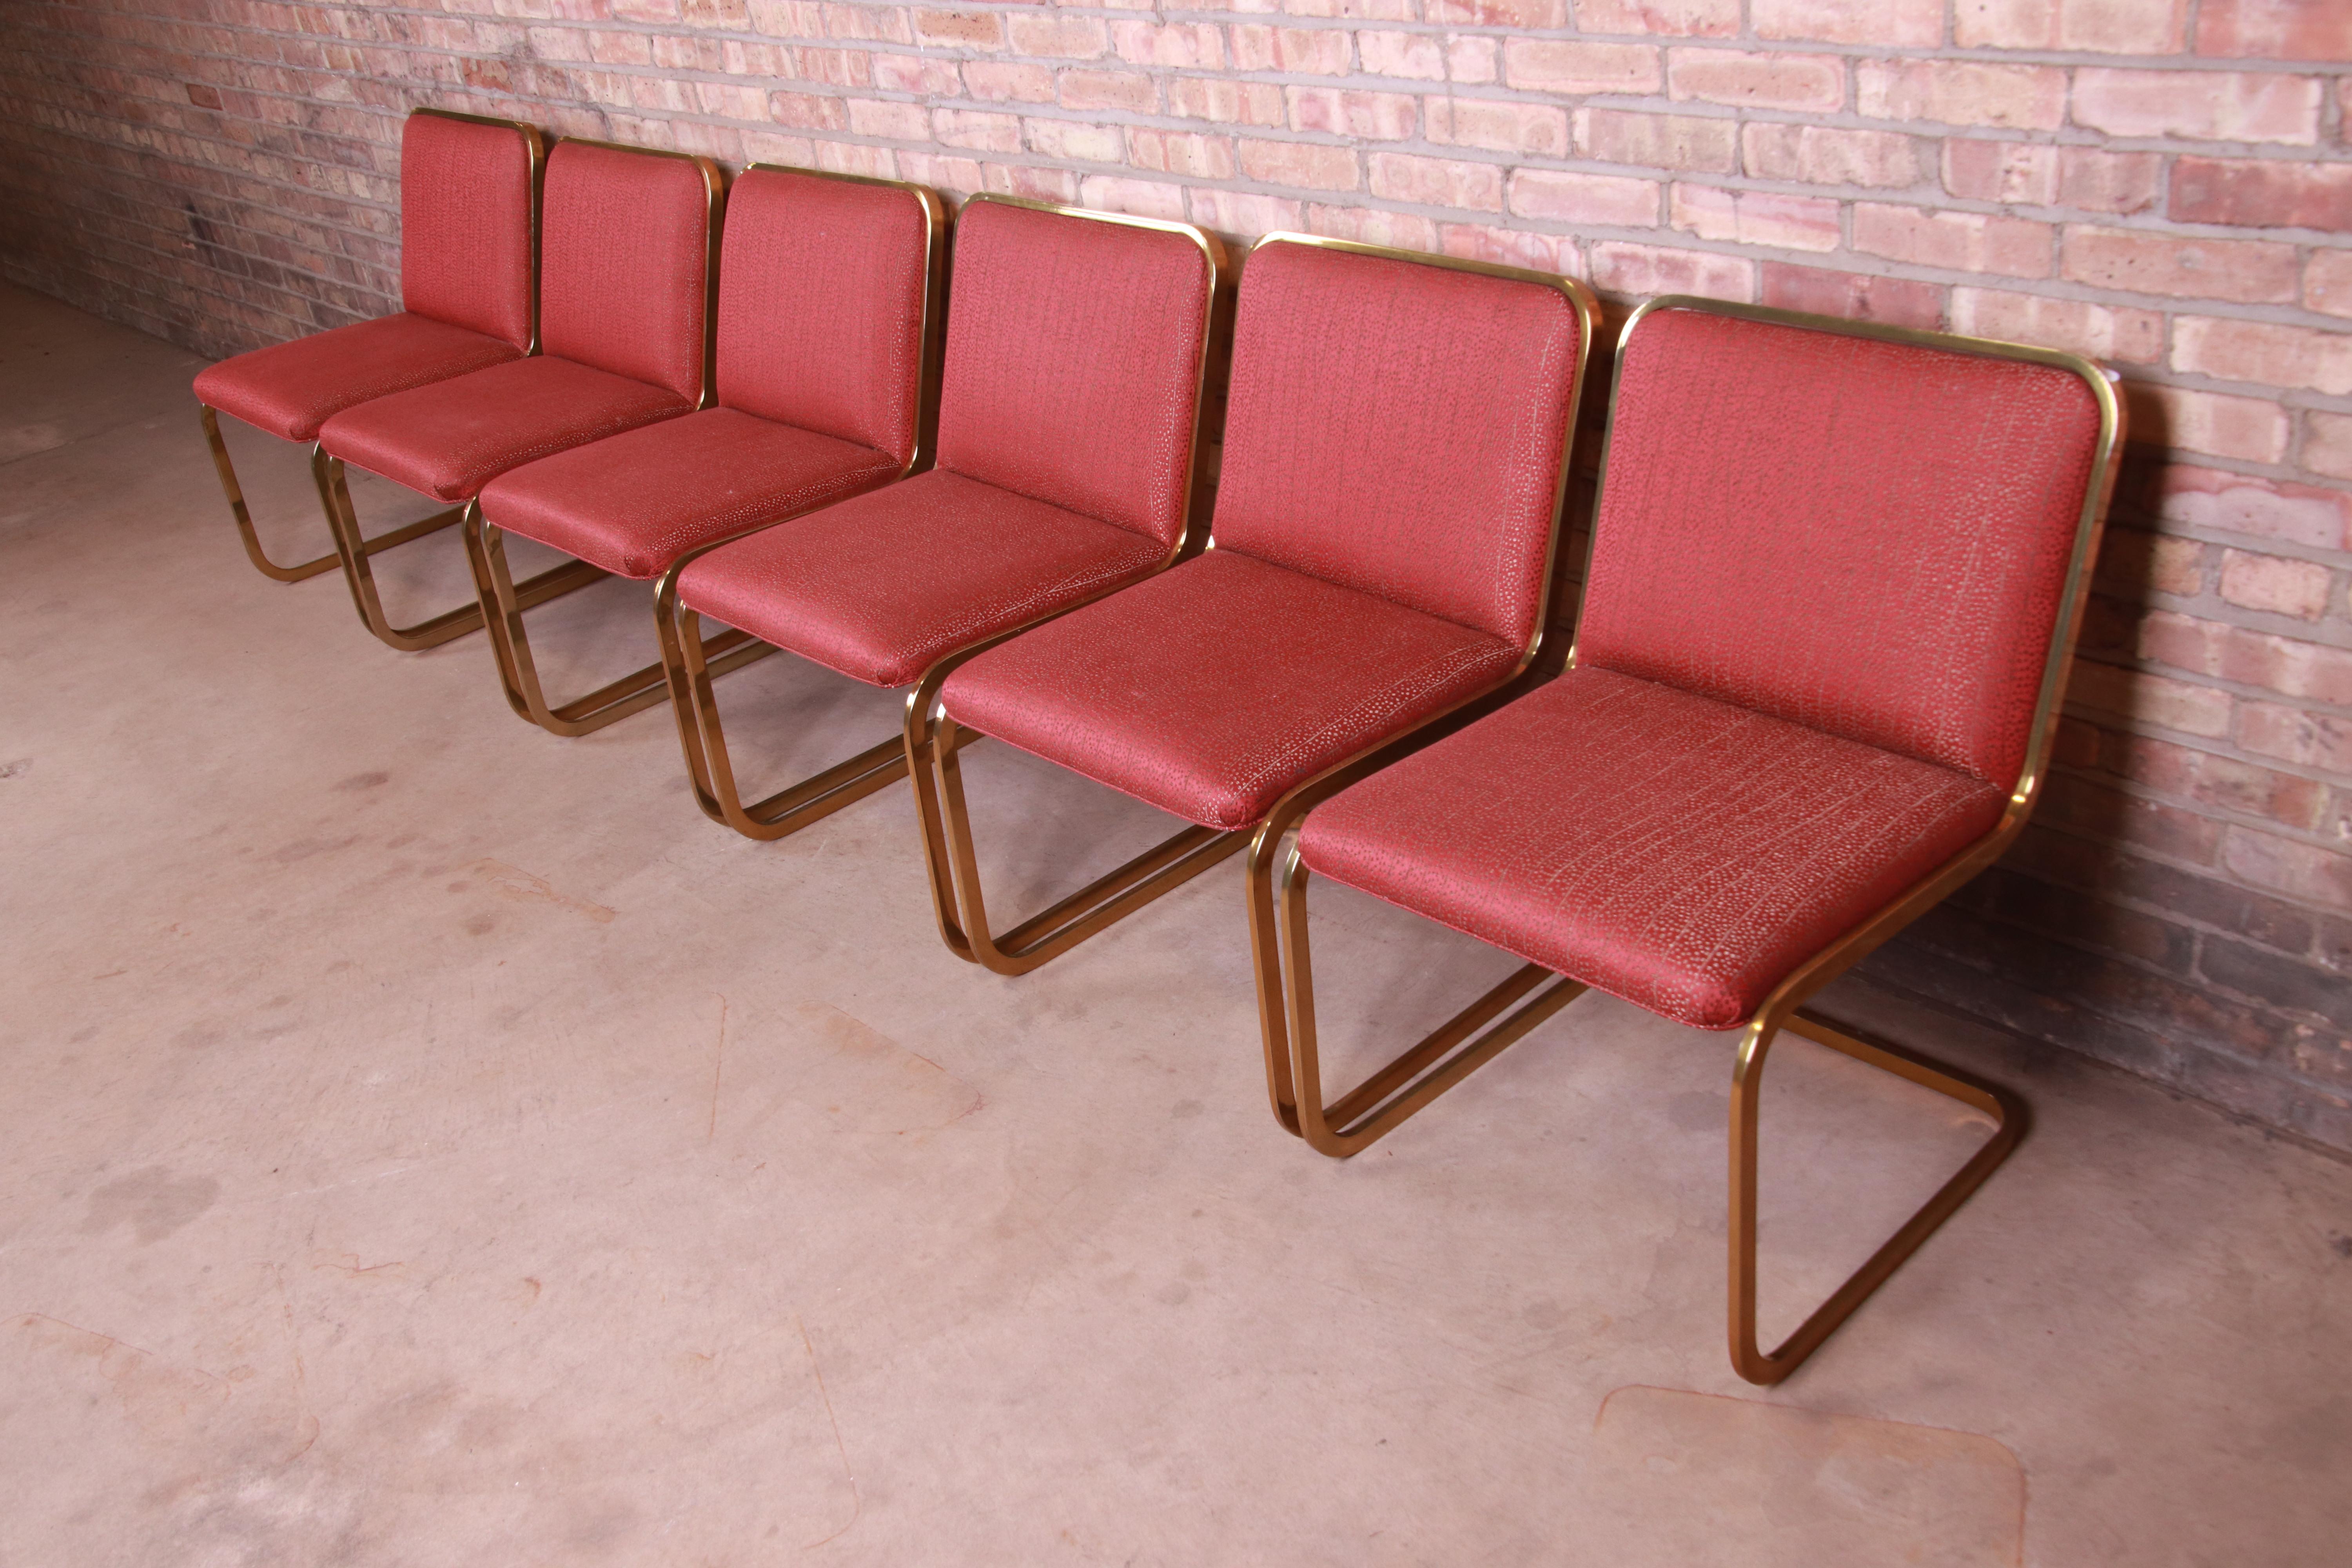 A gorgeous set of six Mid-Century Modern Hollywood Regency dining chairs

In the manner of Milo Baughman

By Brueton

USA, 1970s

Cantilevered brass frames, with stylish red and gold upholstery.

Measures: 21